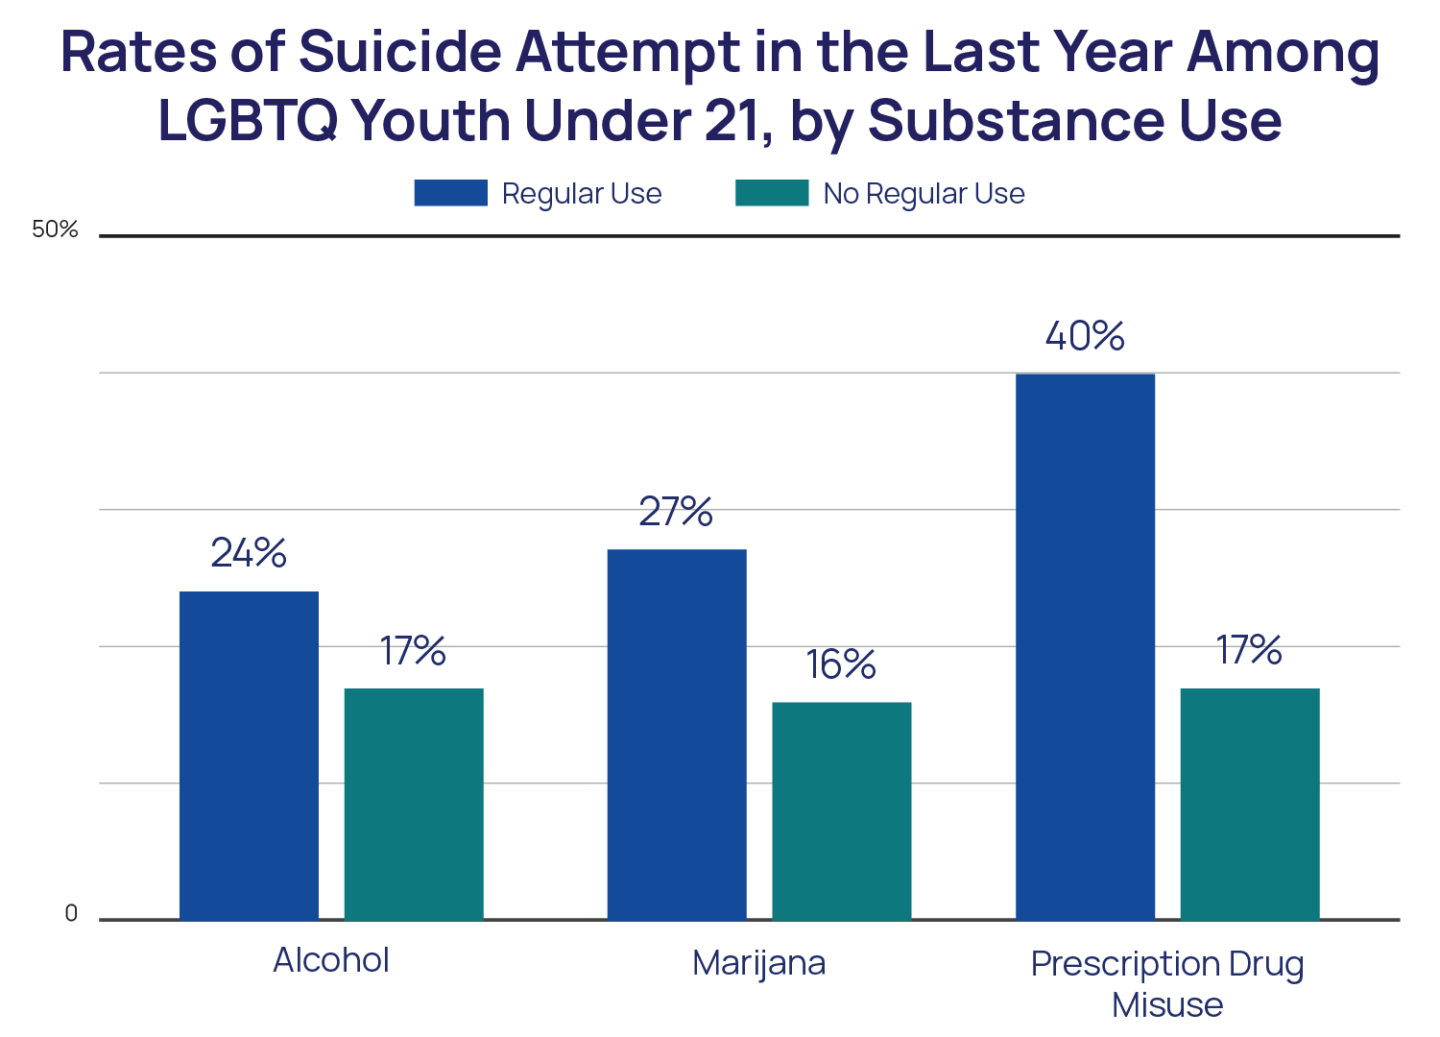 Rates of Suicide Attempt in the Last Year Among LGBTQ Youth Under 21, by Substance Use